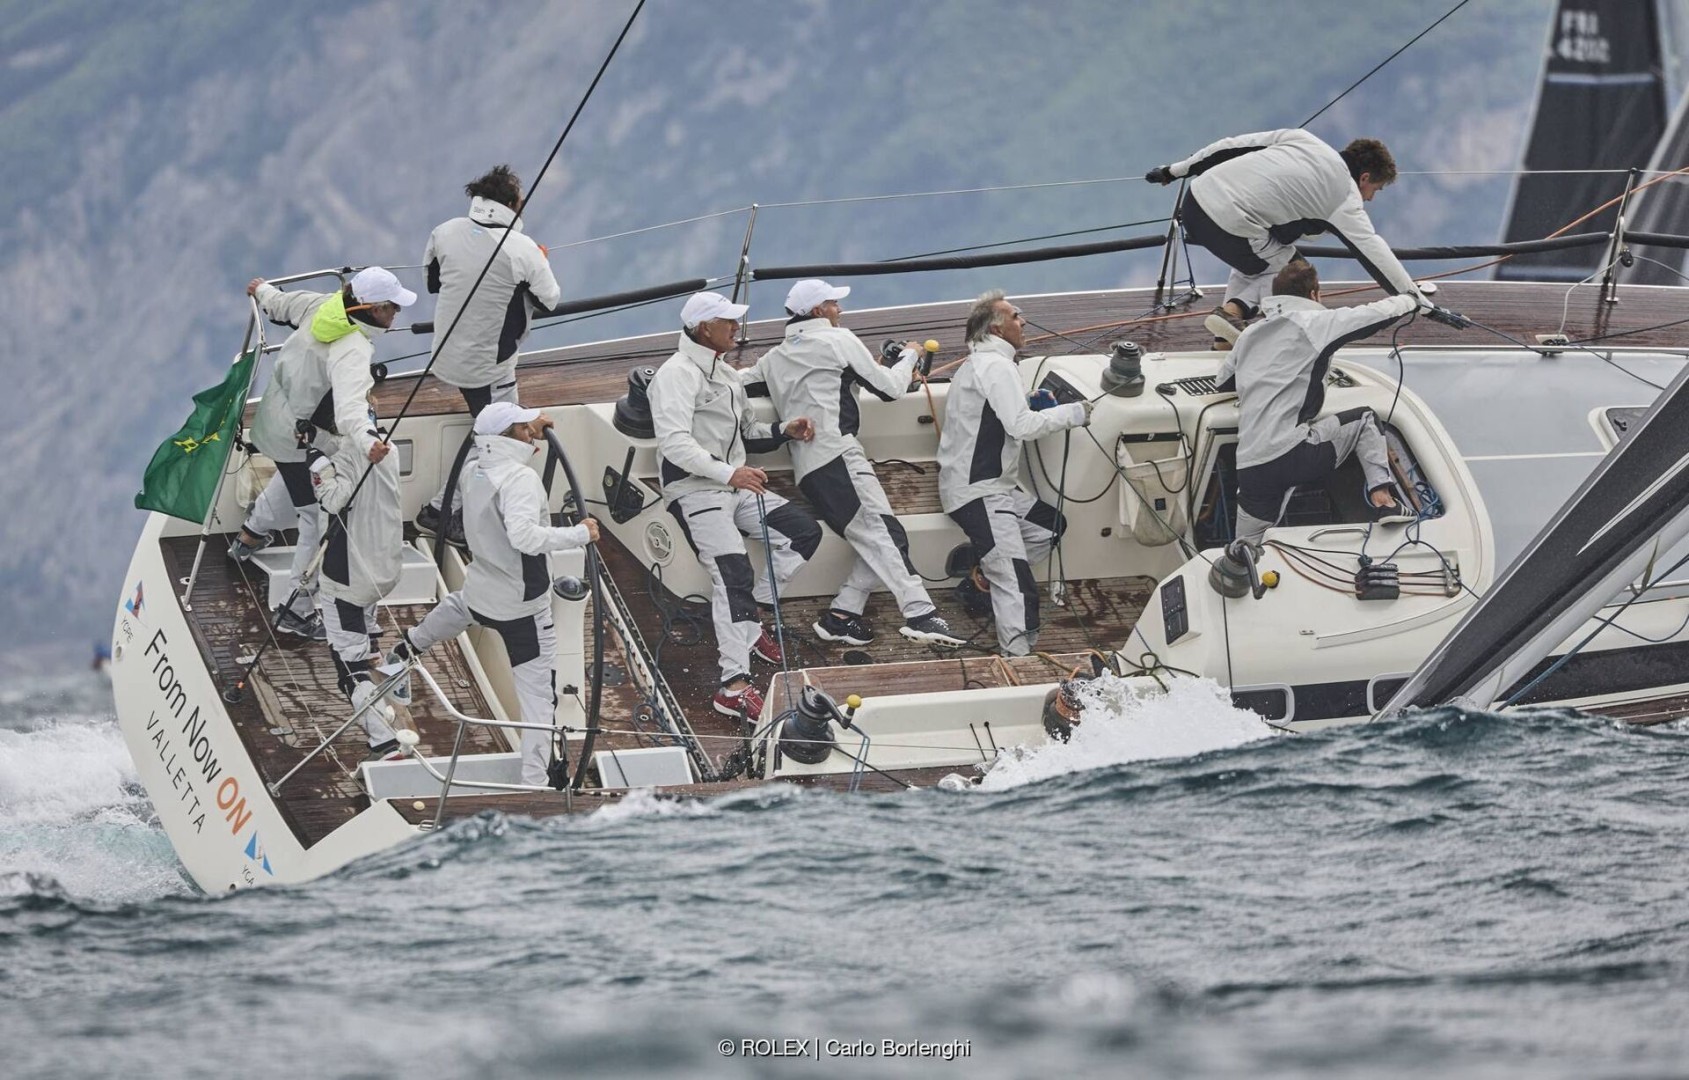 A wet and wild day two at the 2023 ORC Mediterranean Championship